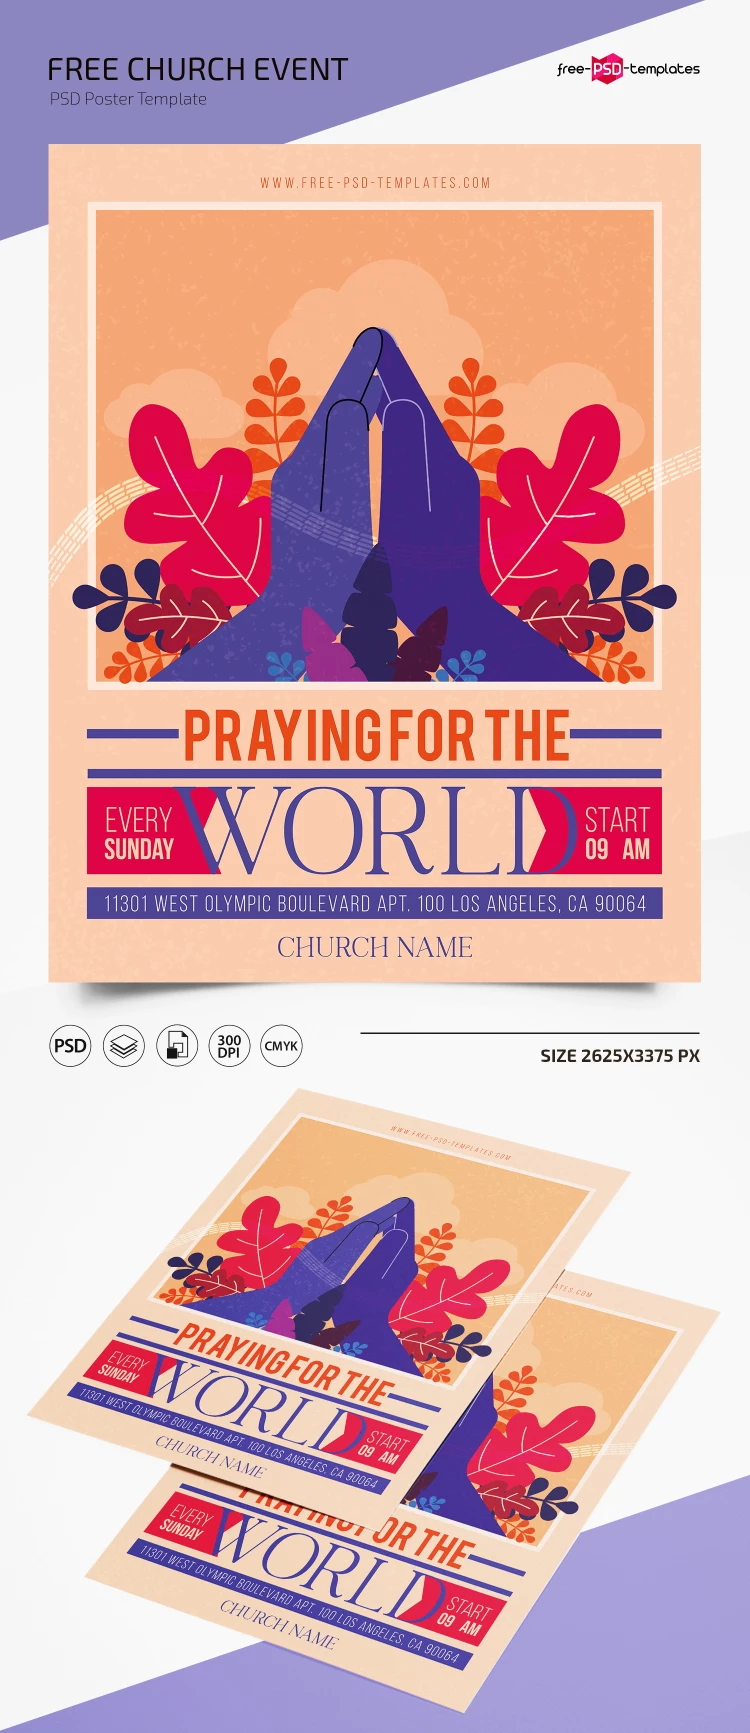 Free Church Event PSD Poster Template